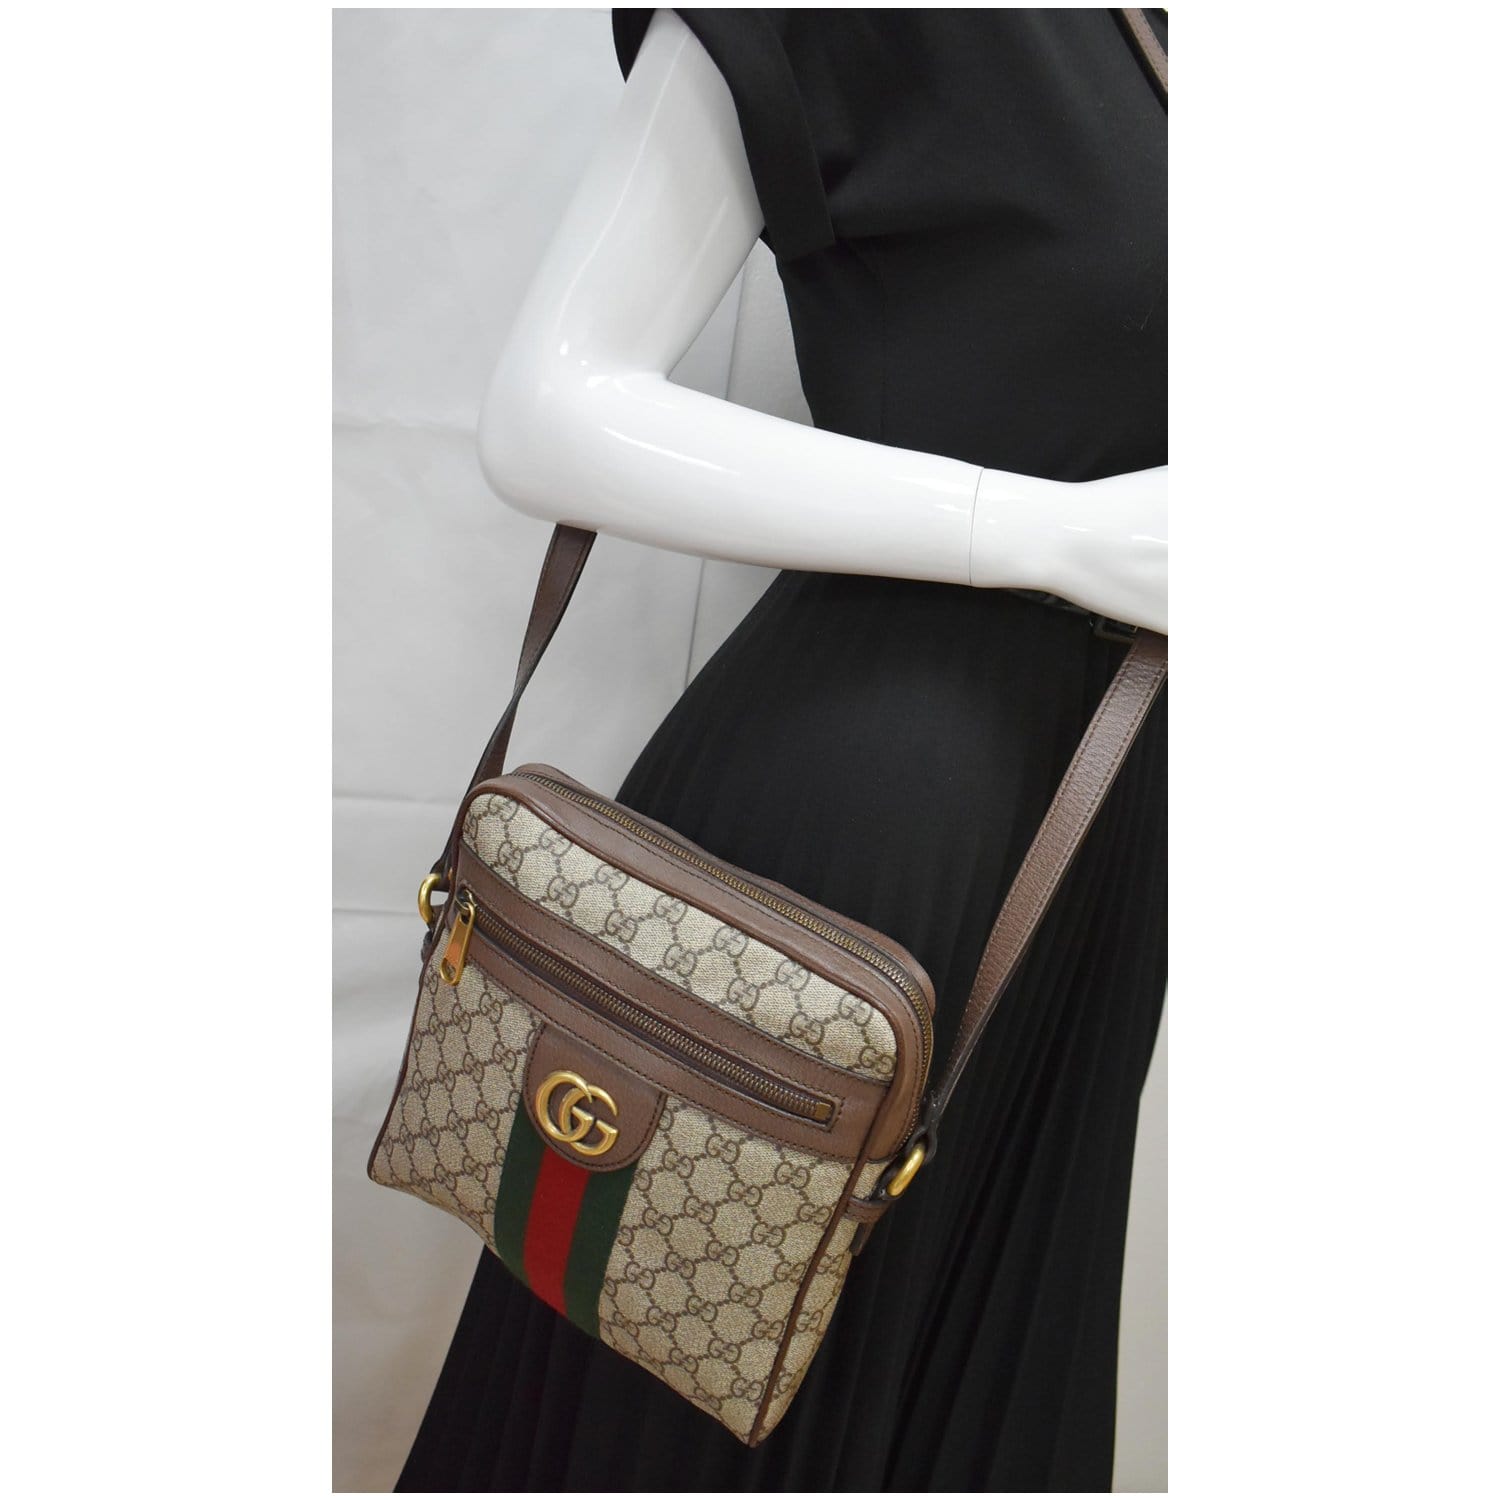 Gucci - Ophidia Small Gg-supreme Canvas Shoulder Bag - Womens - Beige